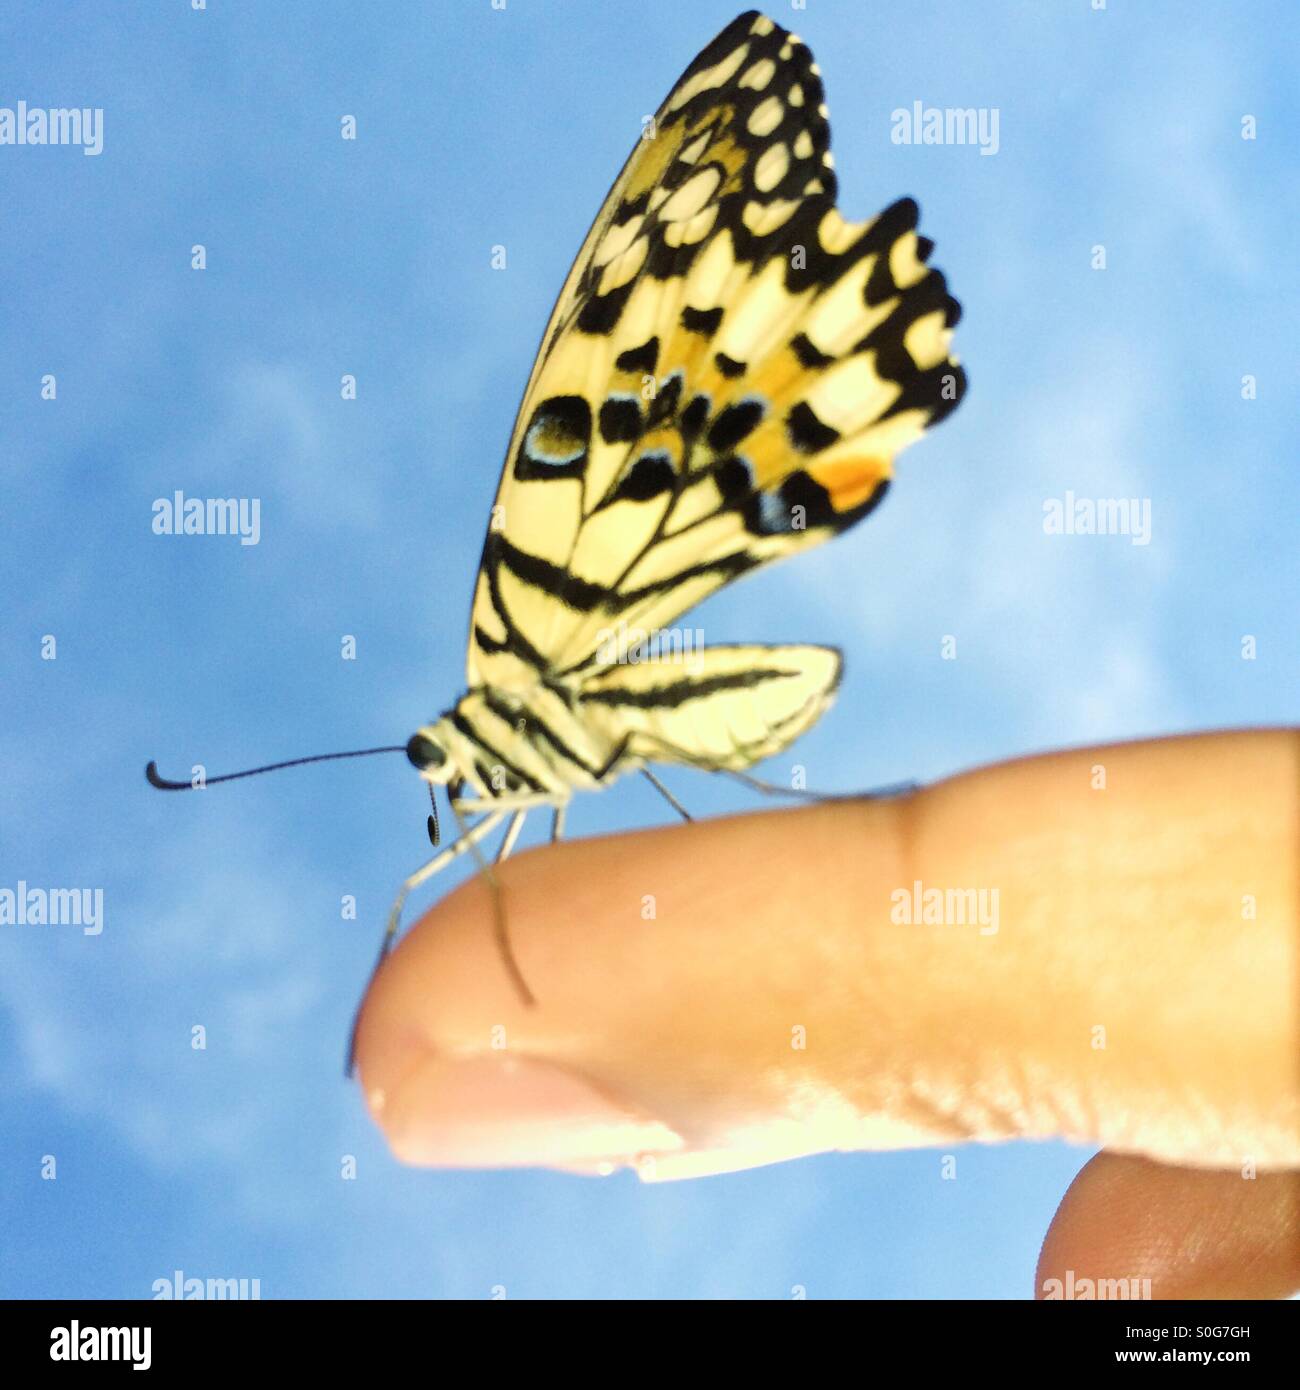 Taming a butterfly. Getting ready to fly. Stock Photo